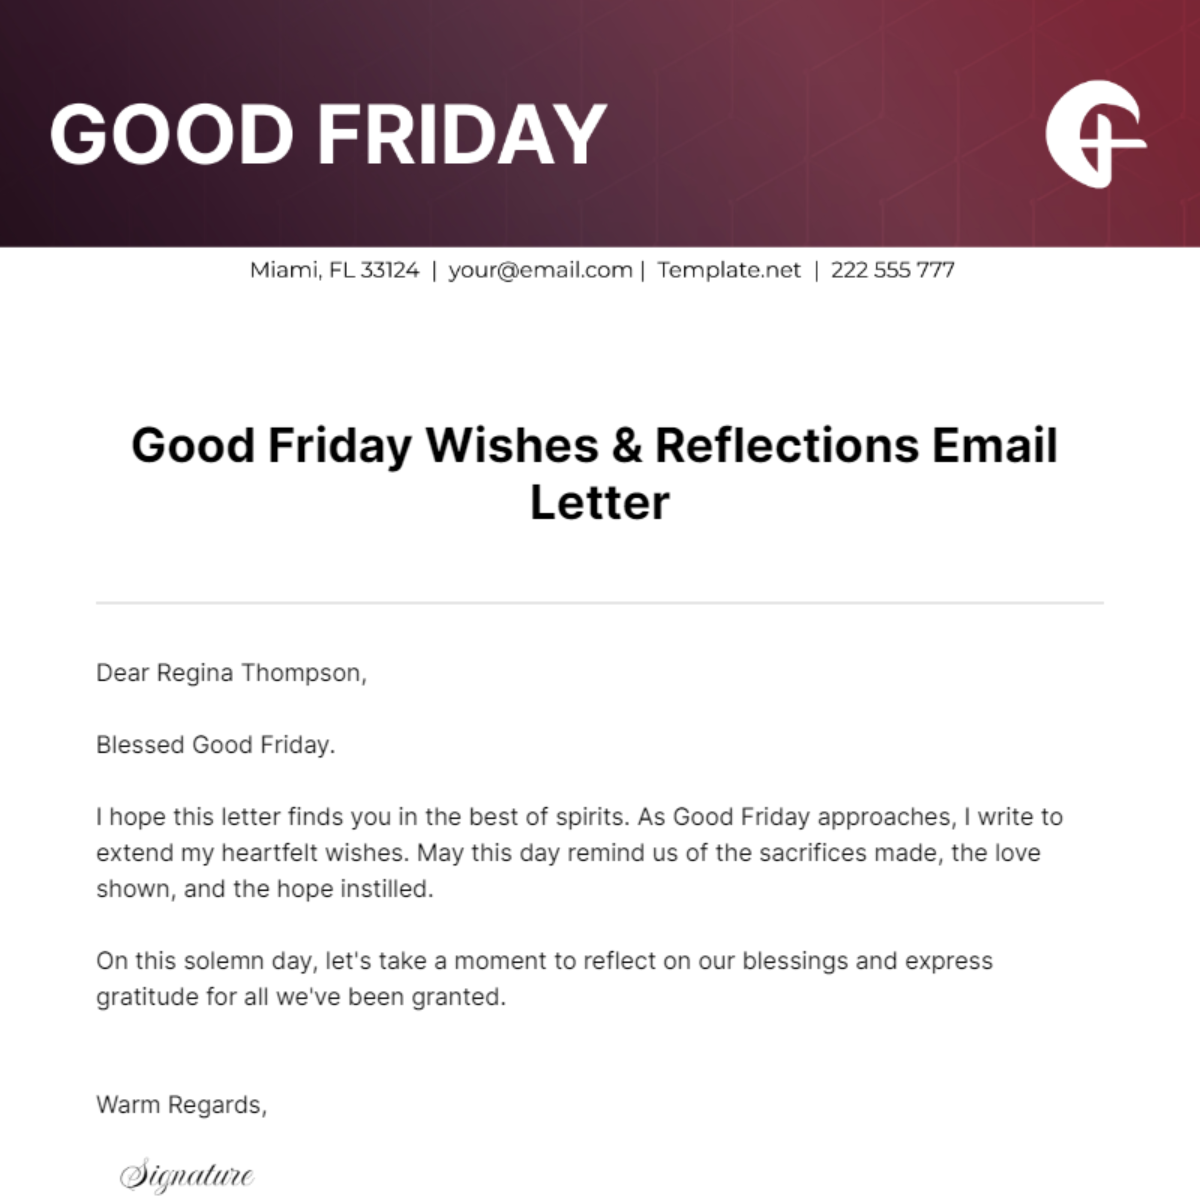 Good Friday Wishes & Reflections Email Letter Template